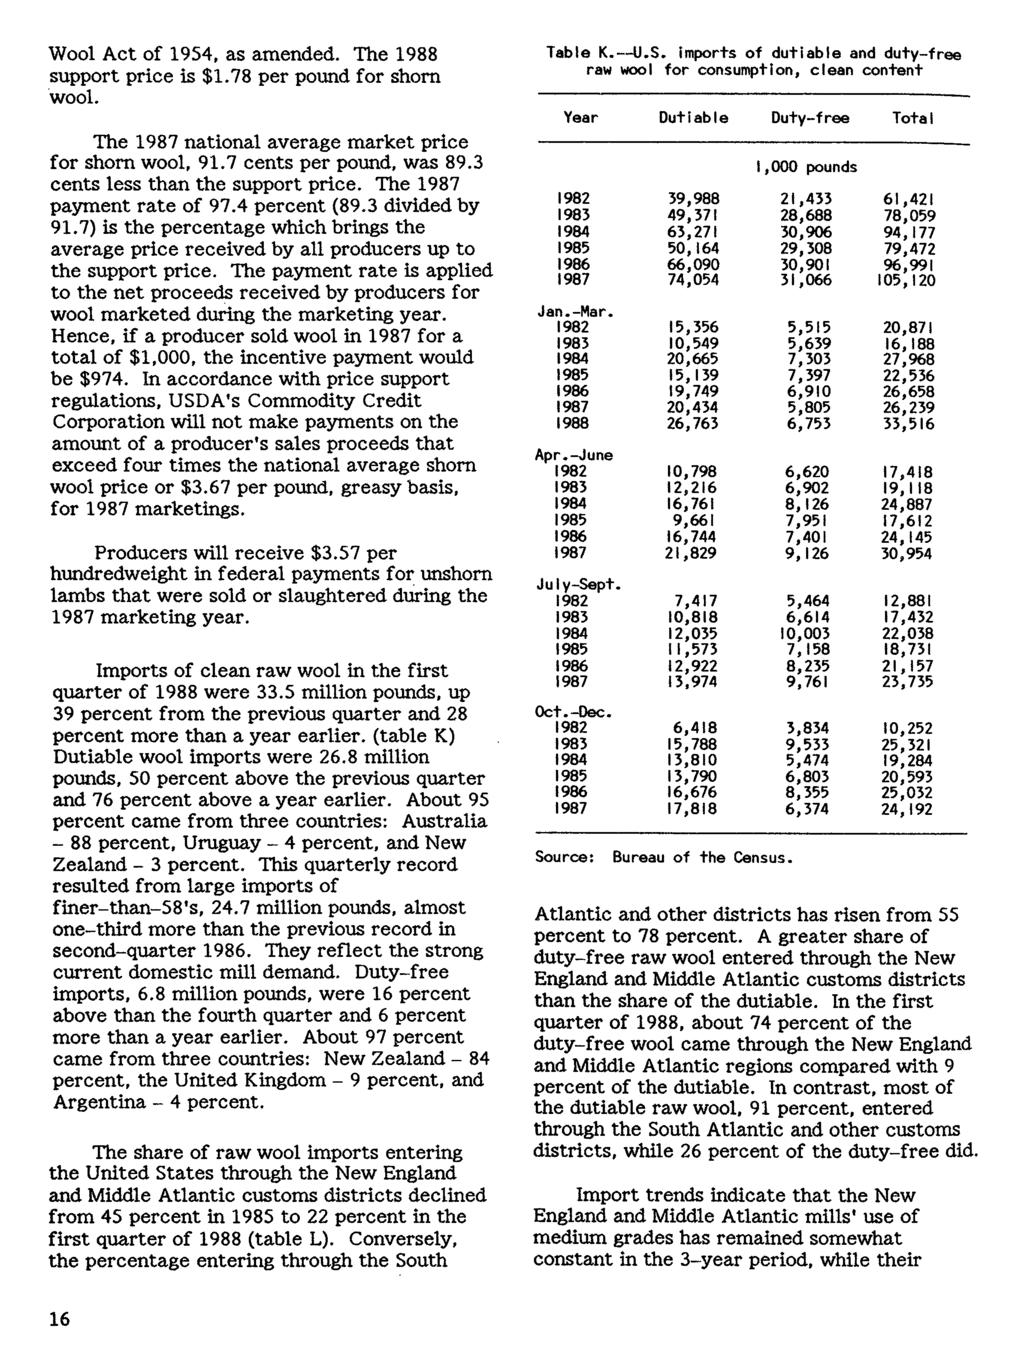 Wool Act of 1954, as amended. The 1988 support price is $1.78 per pound for shorn wool. The 1987 national average market price for shorn wool, 91.7 cents per pound, was 89.